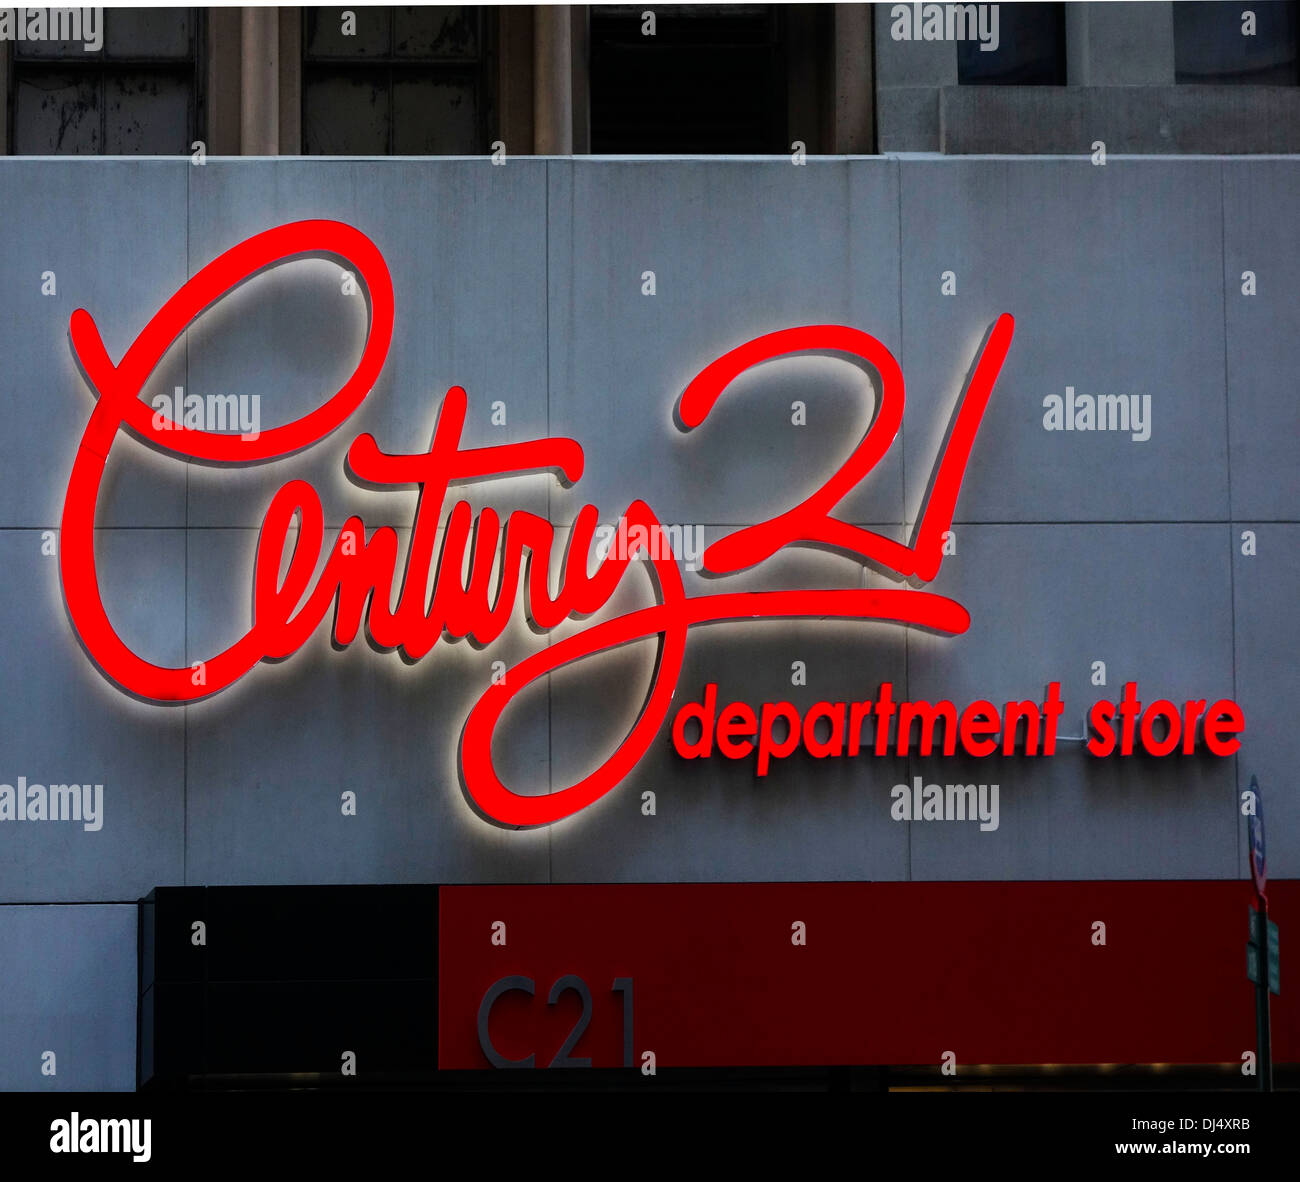 New york century 21 department store hires stock photography and